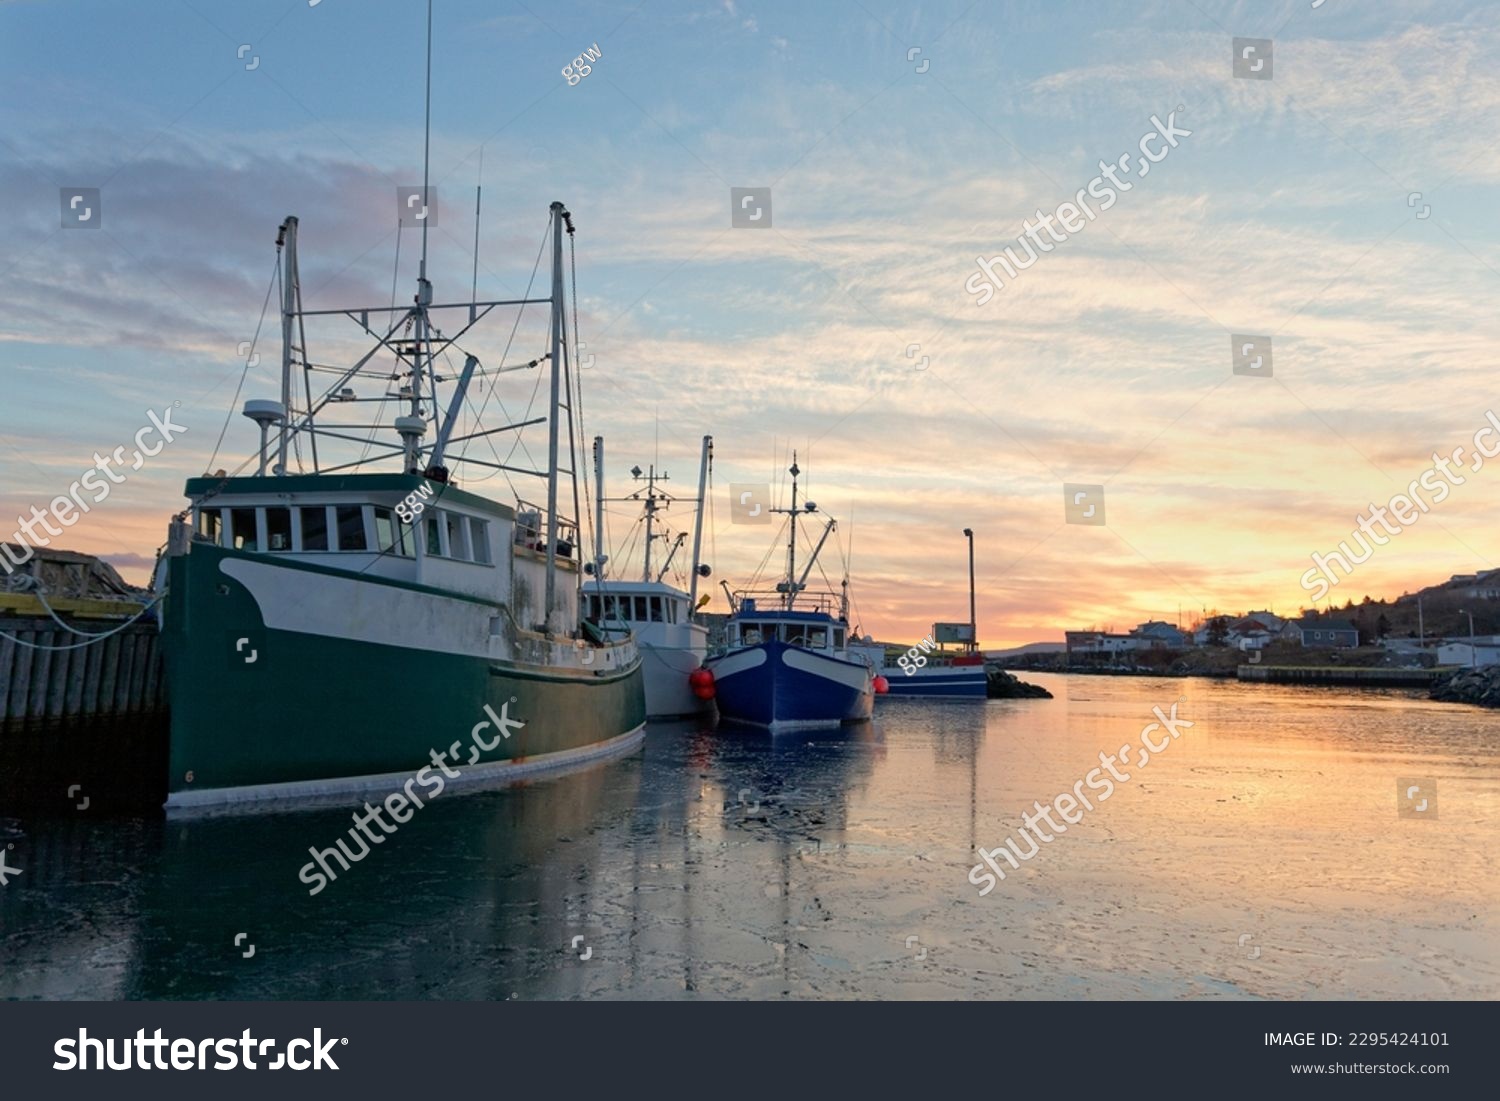 Fishing boats moored at the dock at sunset during the winter, Port de Grave, Newfoundland and Labrador, Canada. #2295424101